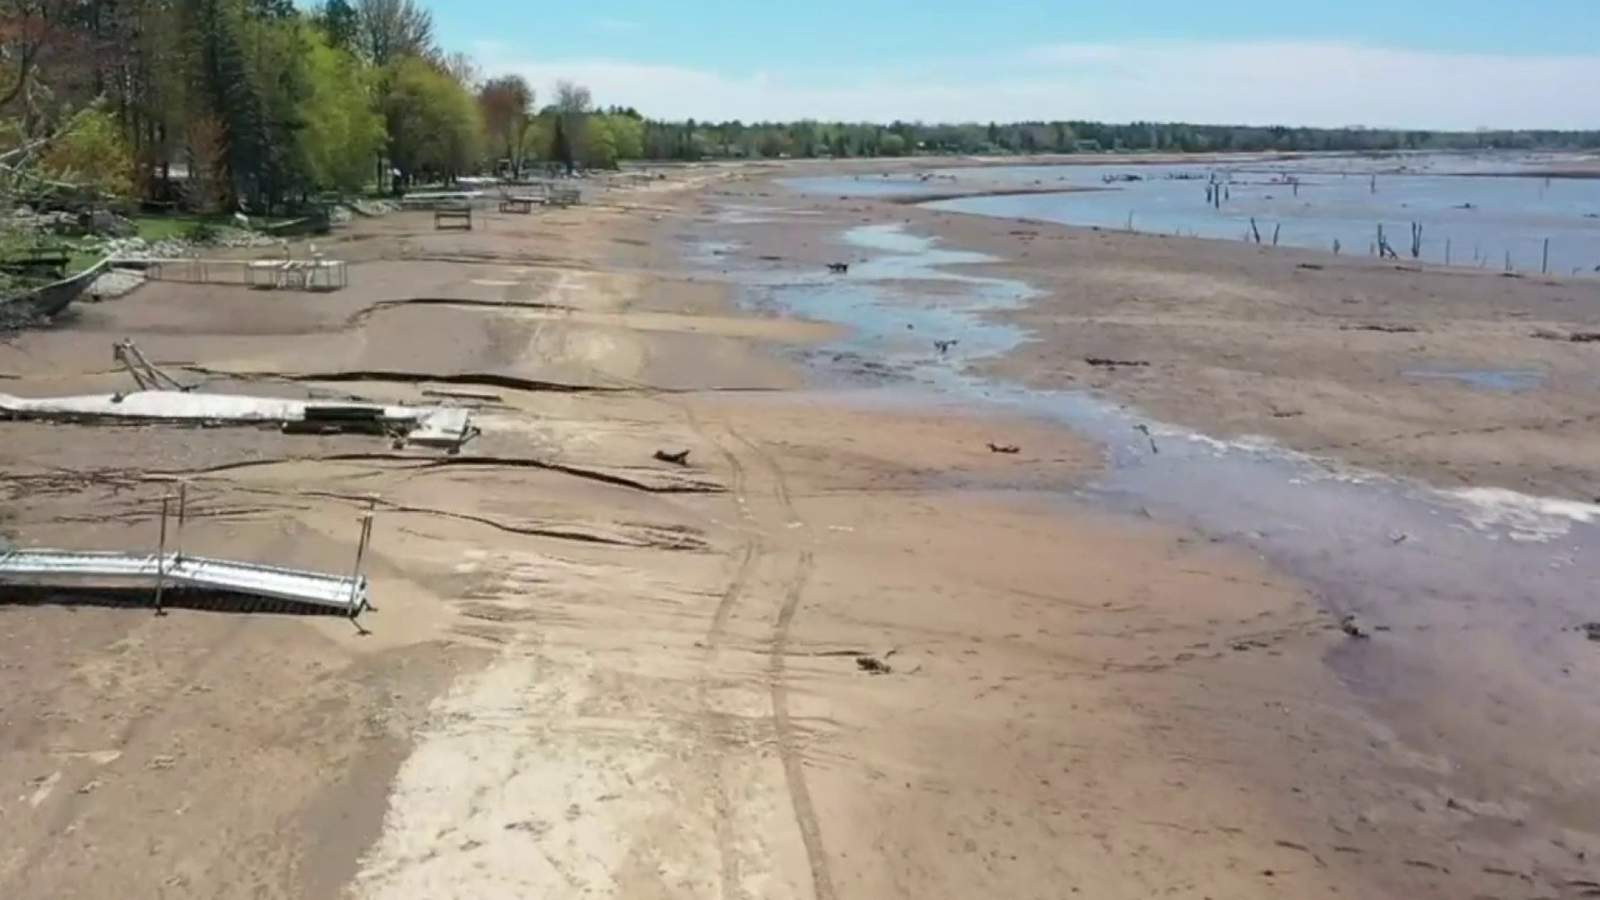 Dry lakebeds pose risks to adventurers in Michigan’s Midland area